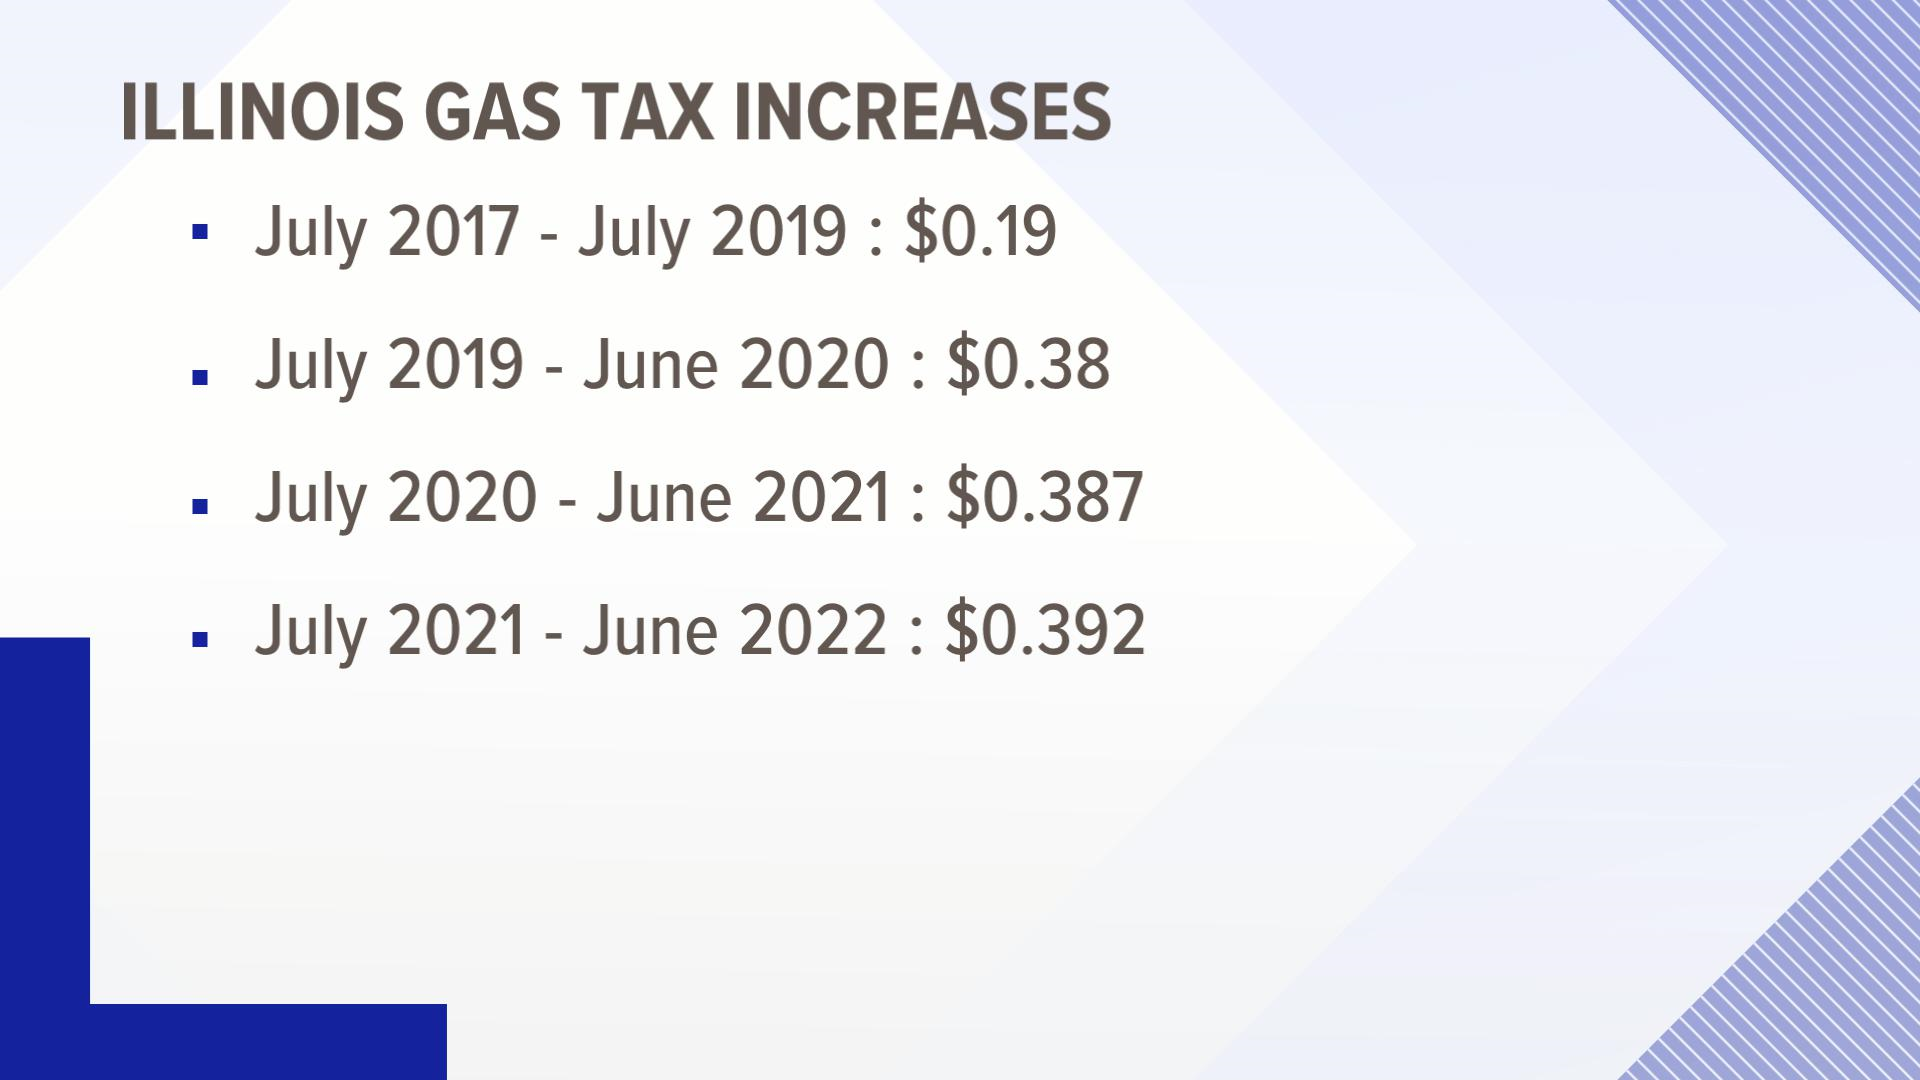 Illinois "gas tax" has increased every year since it was doubled in